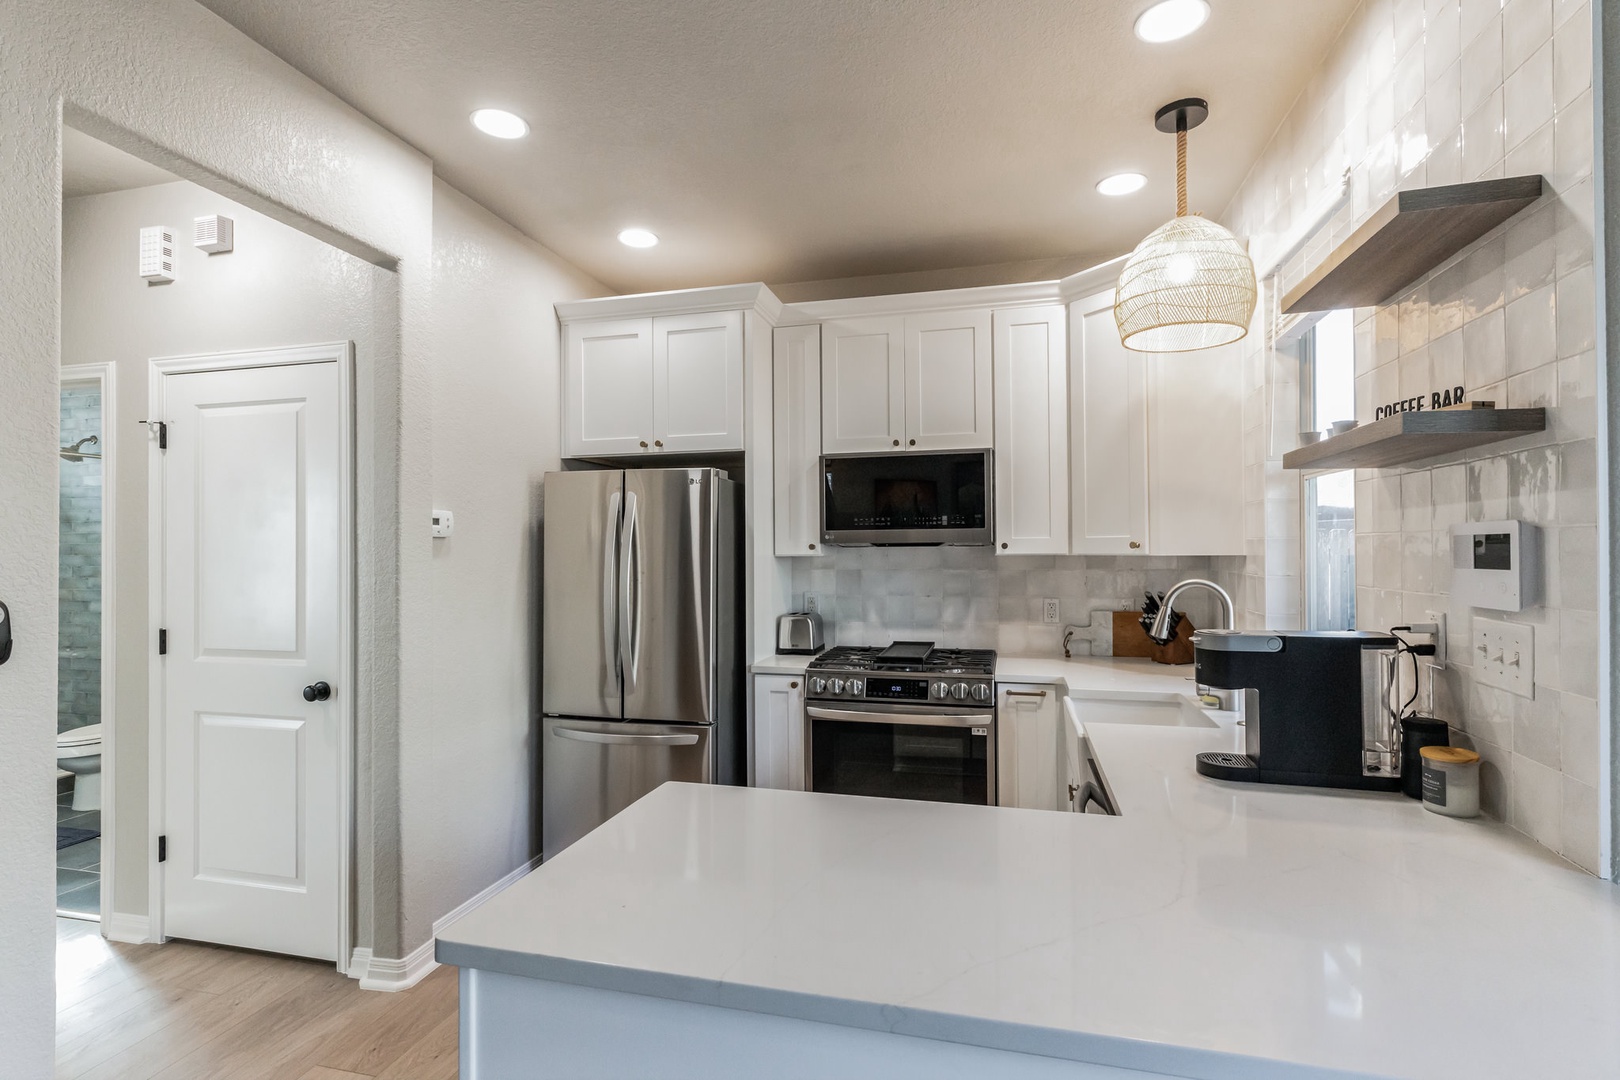 Fully-equipped kitchen featuring sleek stainless steel appliances